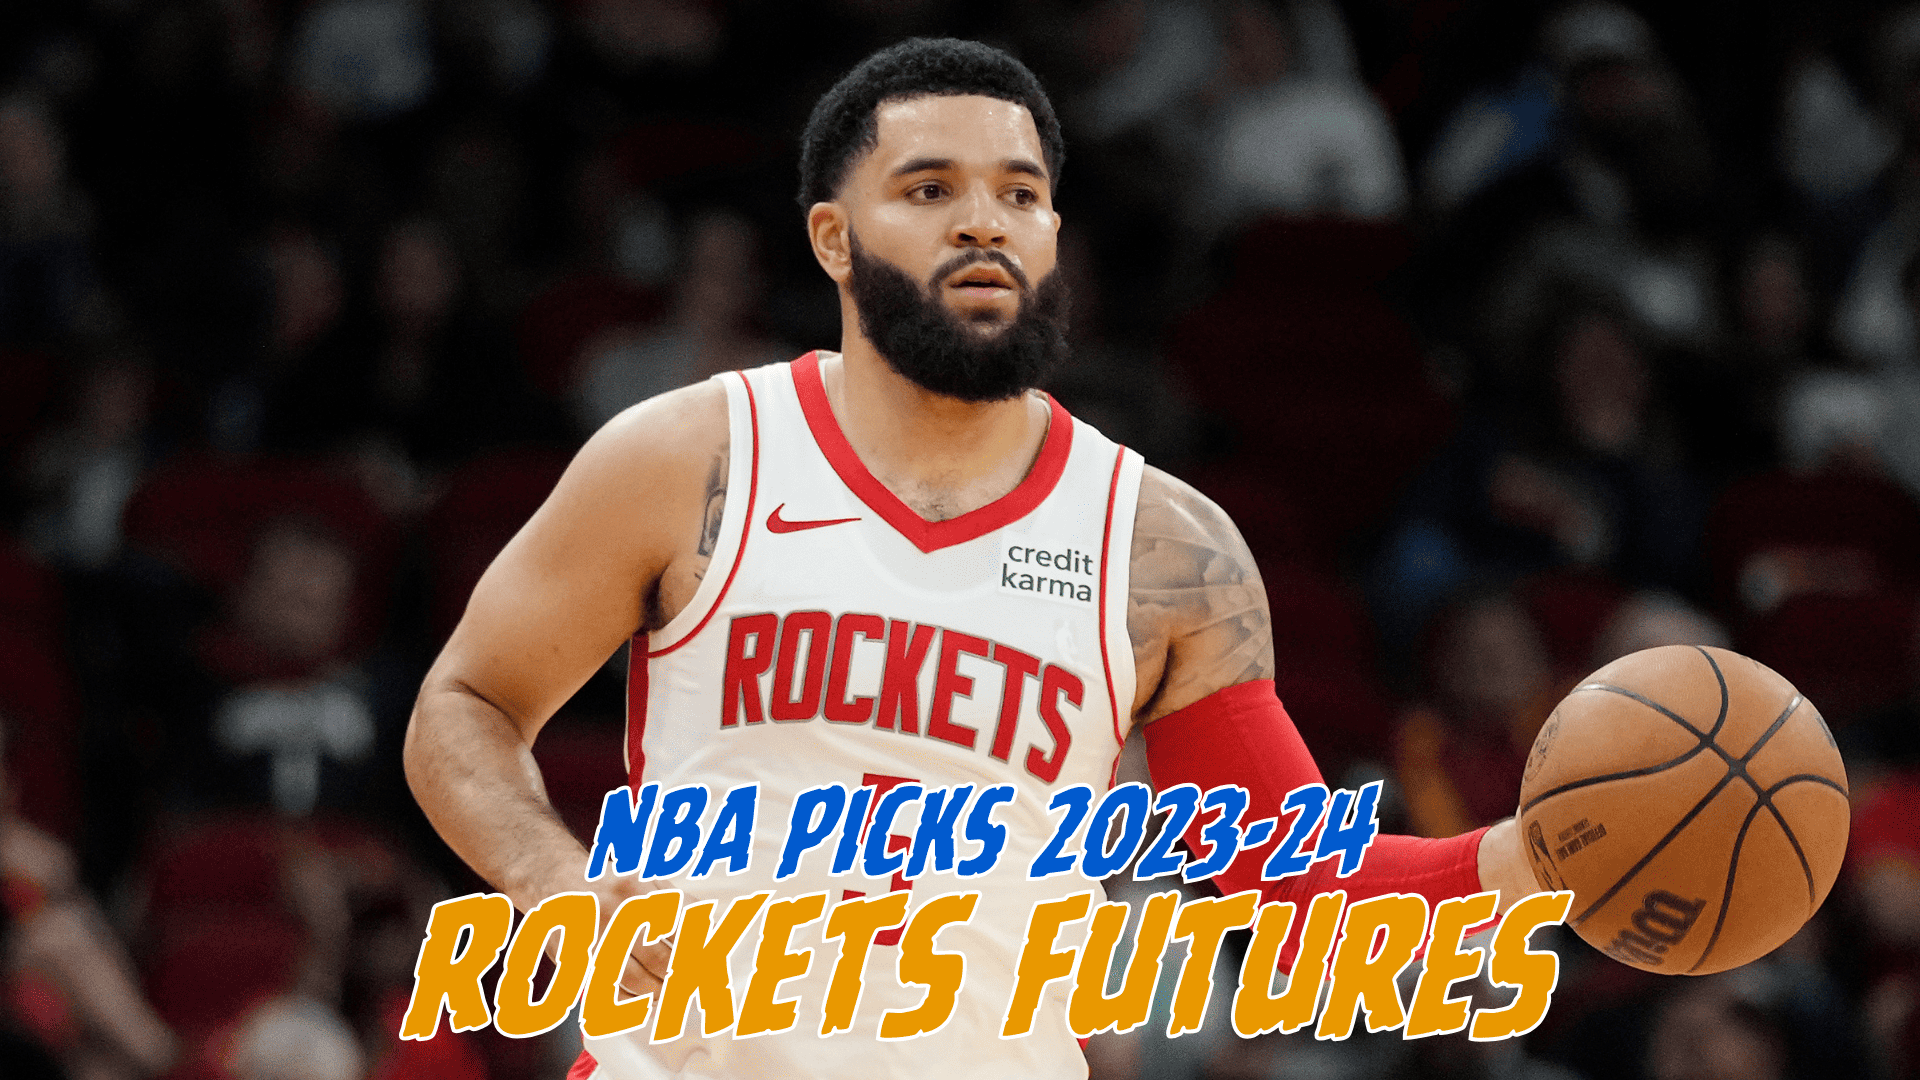 Houston Rockets at Portland Trail Blazers odds, picks and predictions